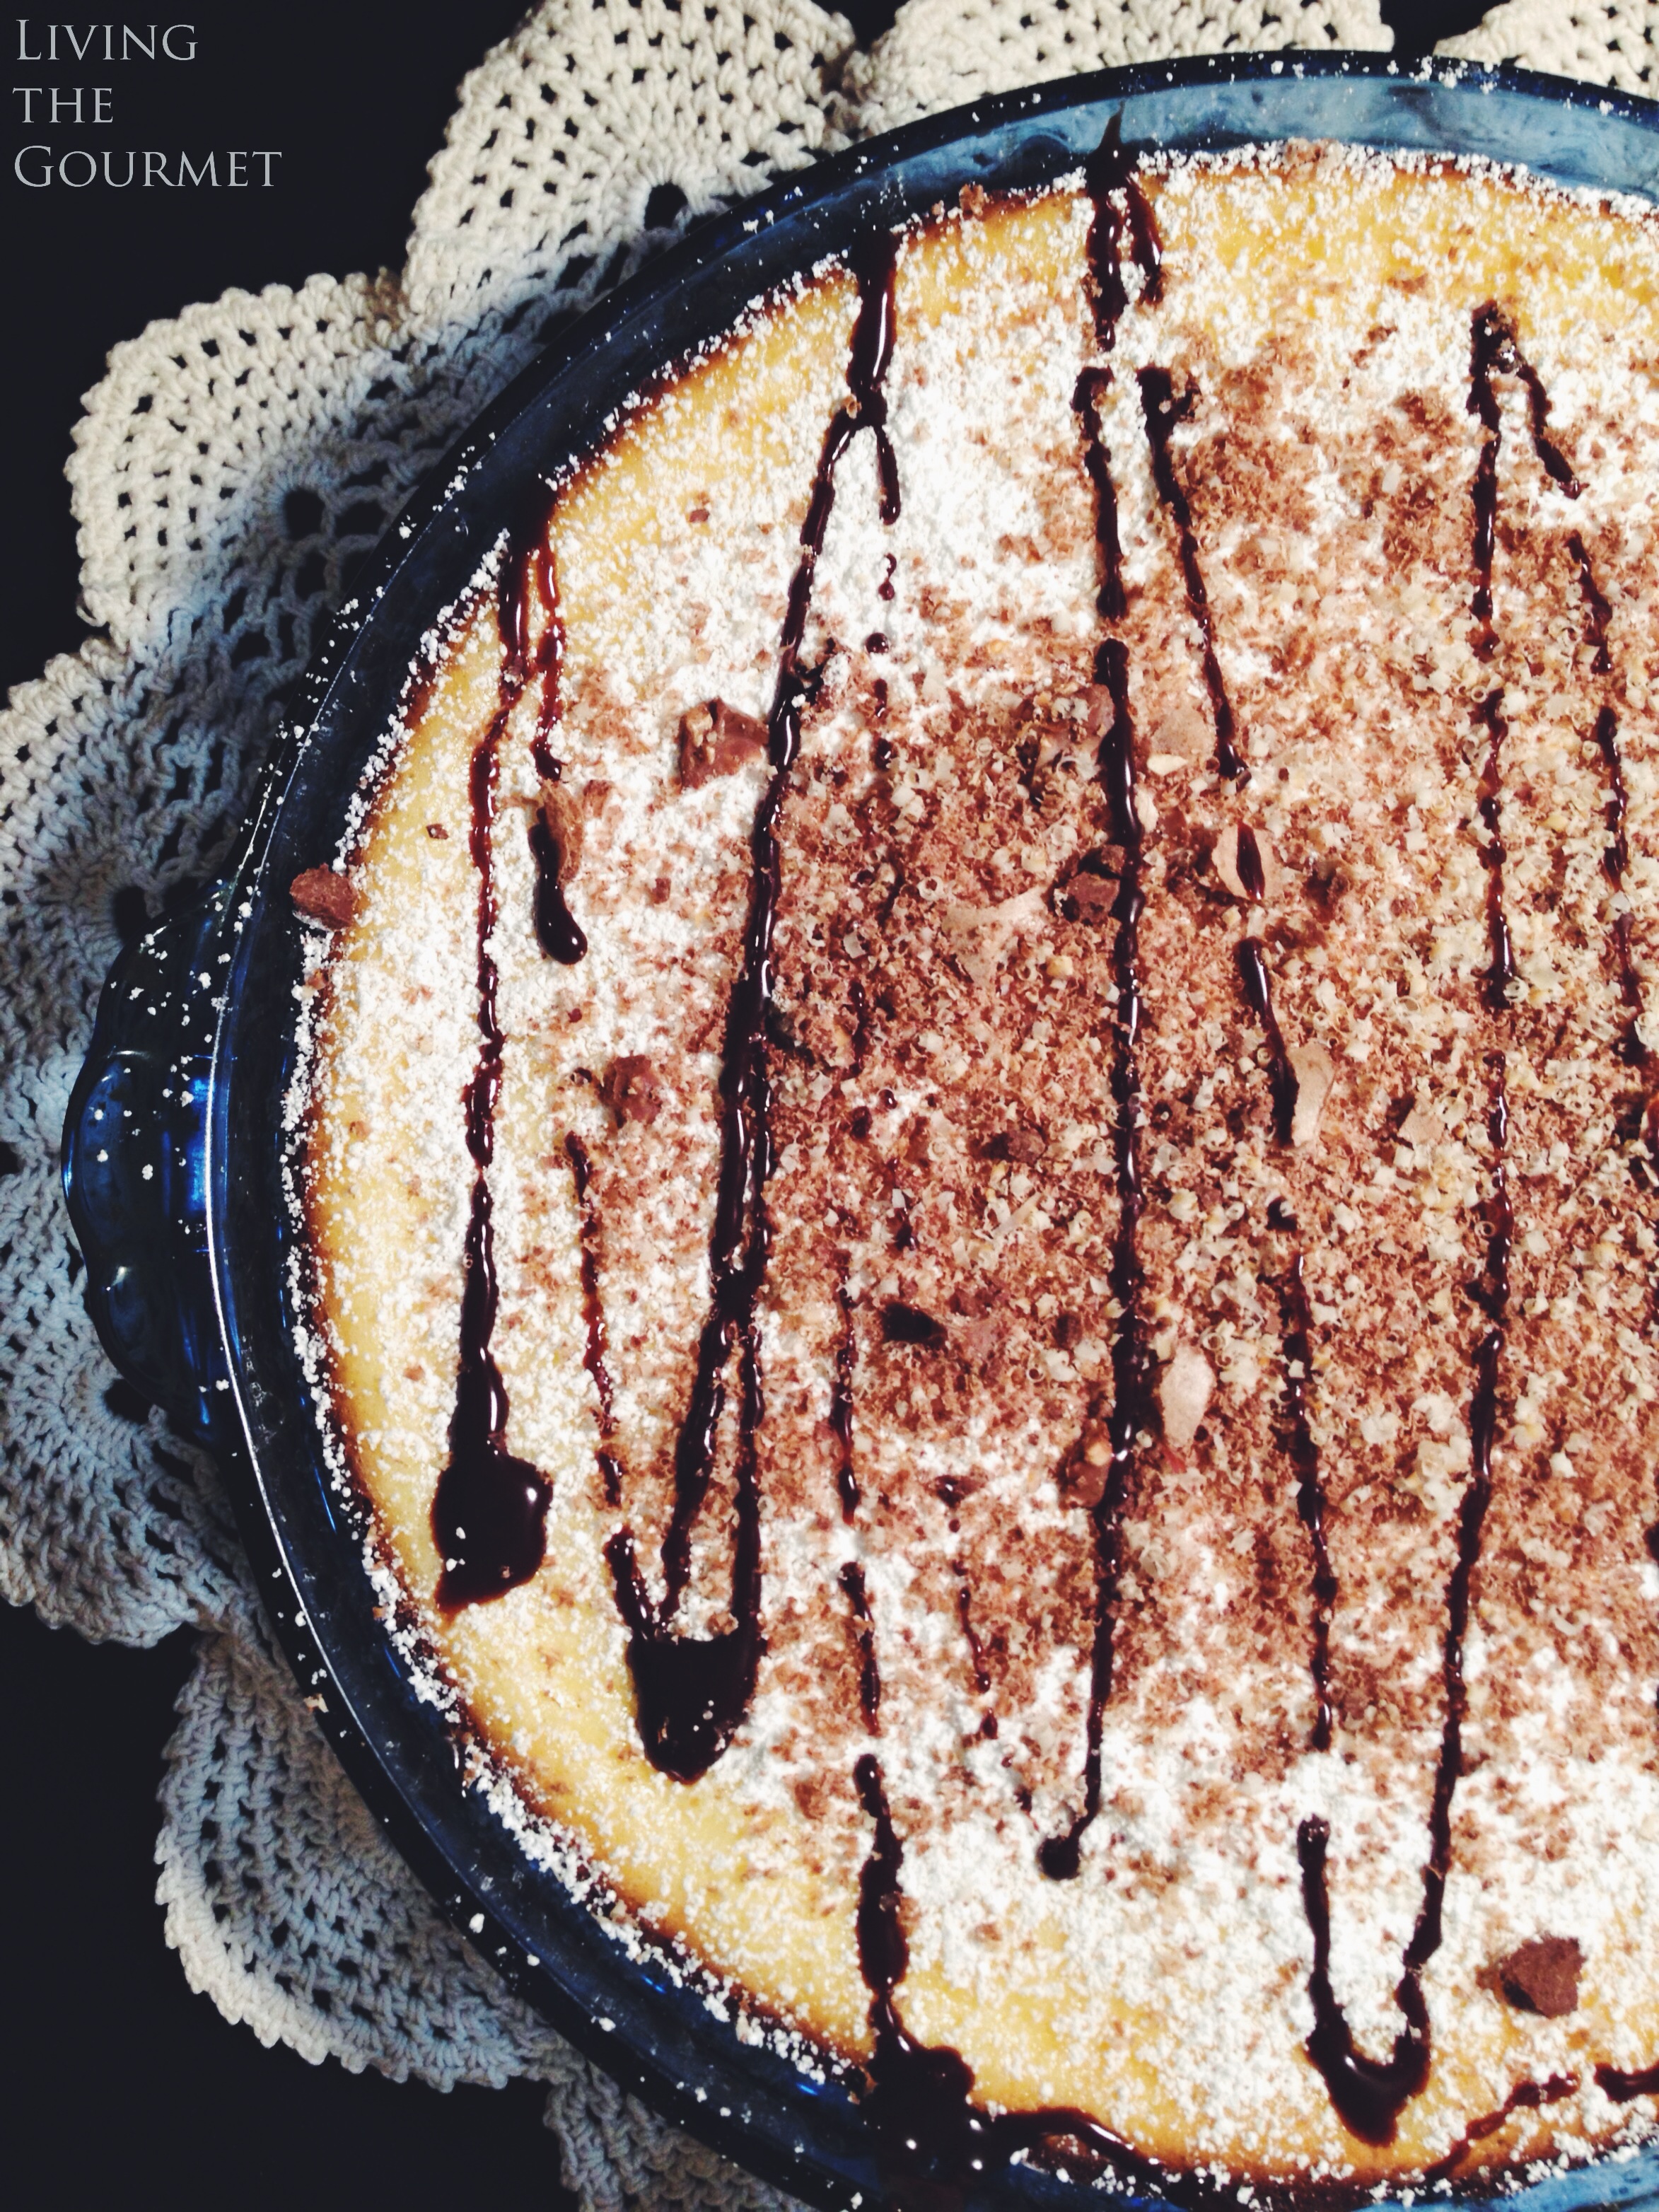 Living the Gourmet: Chocolate Topped Cheesecake